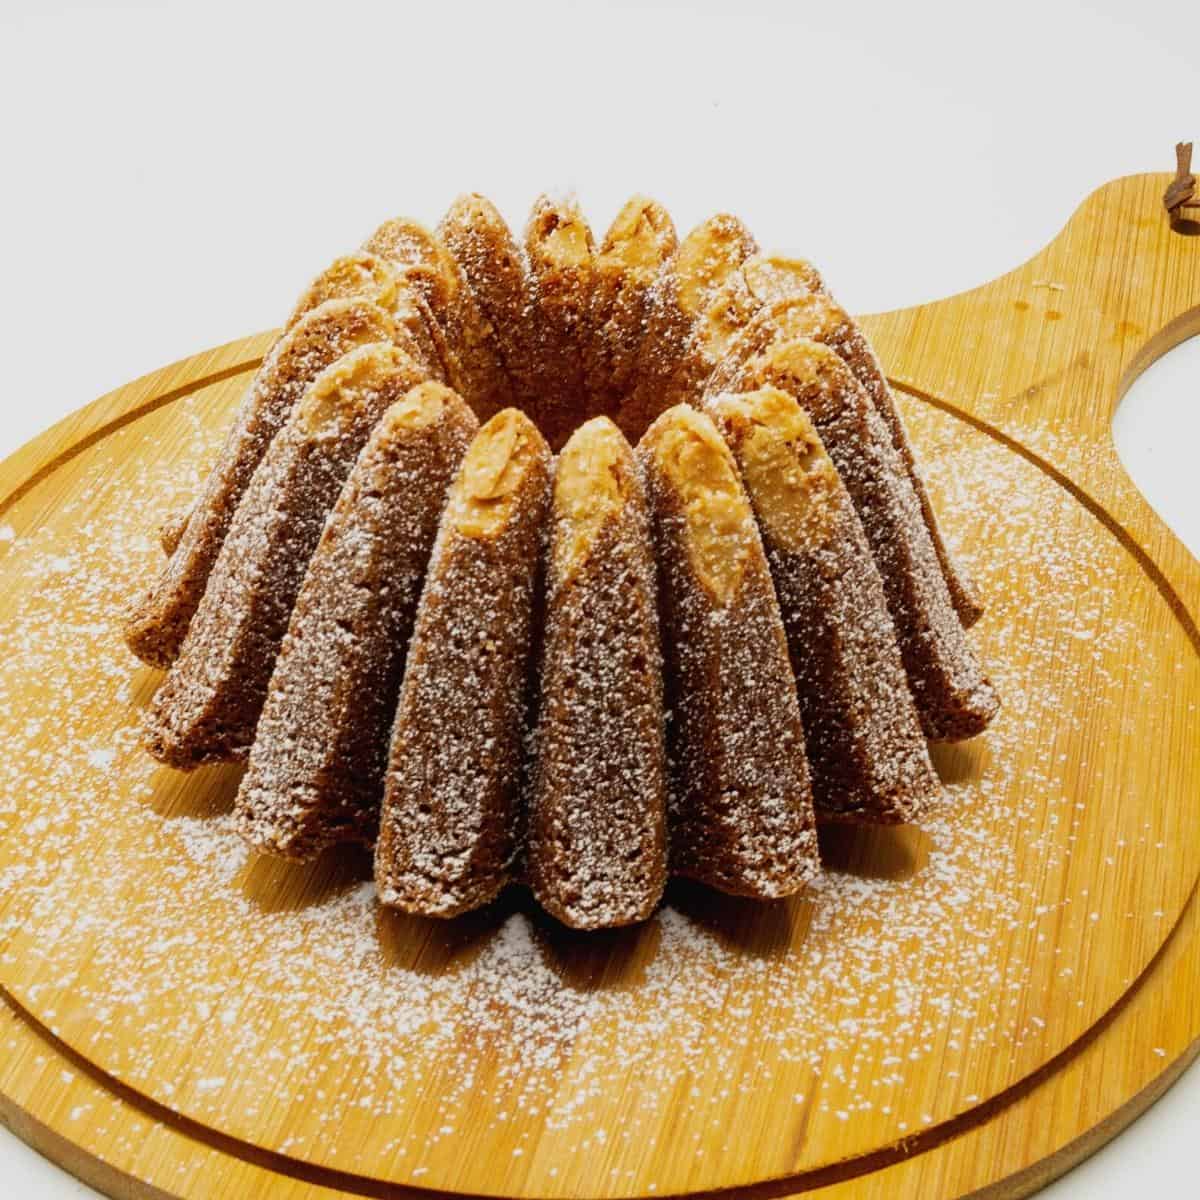 A marzipan bundt cake on a wooden board.